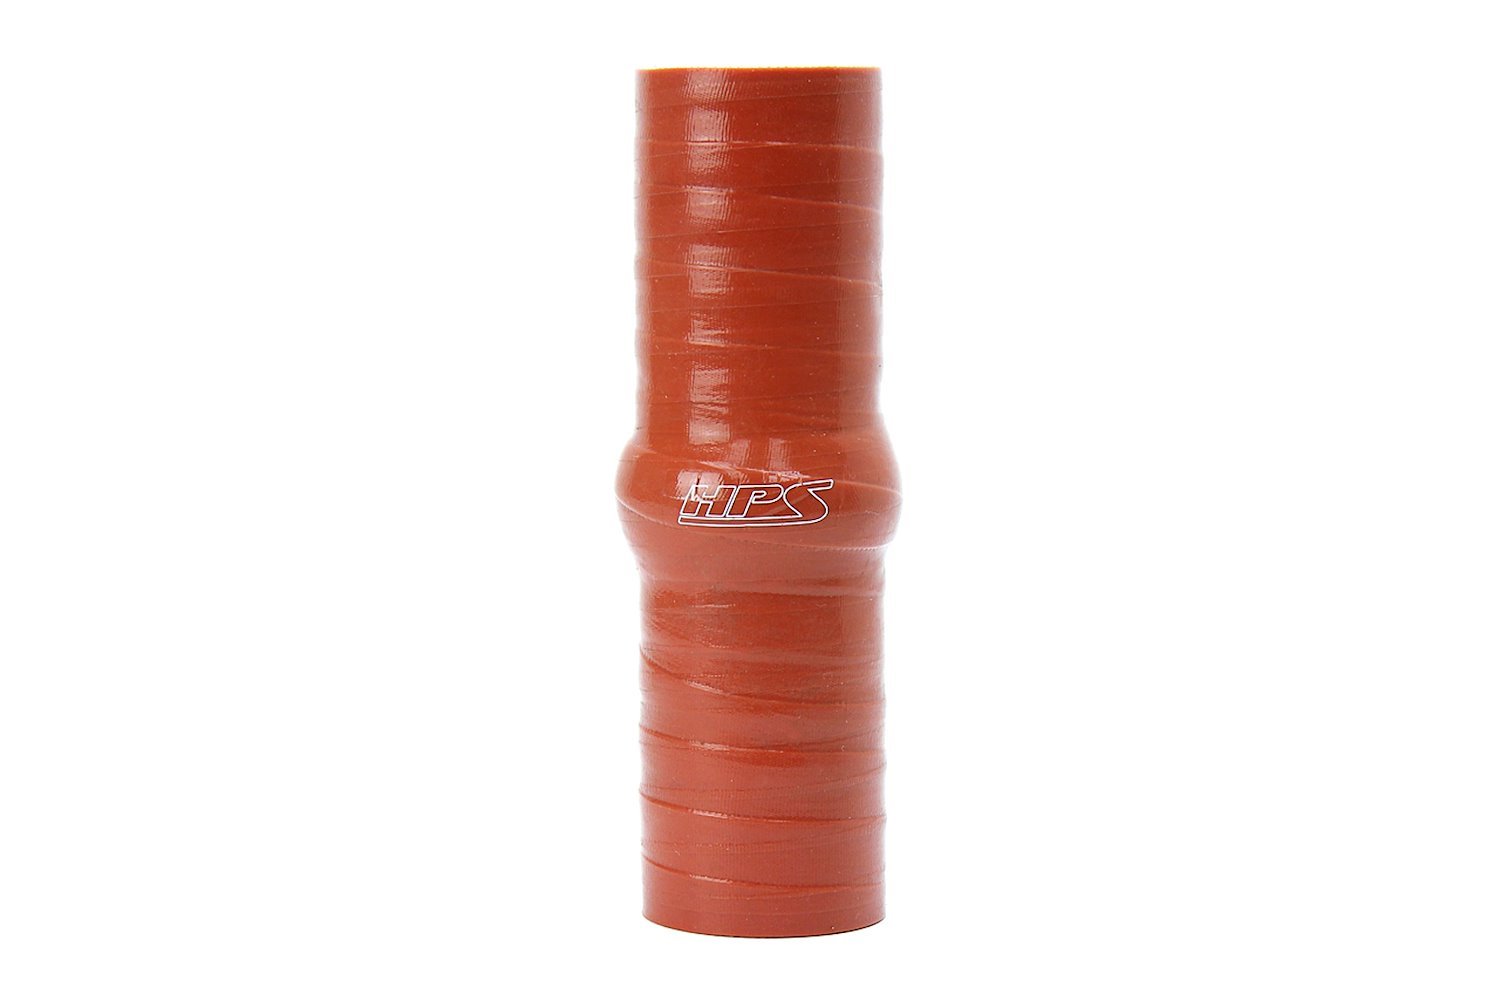 SHC-087-L4-HOT Silicone Hump Coupler Hose, High-Temp 4-Ply Aramid Reinforced, 7/8 in. ID, 4 in. Long